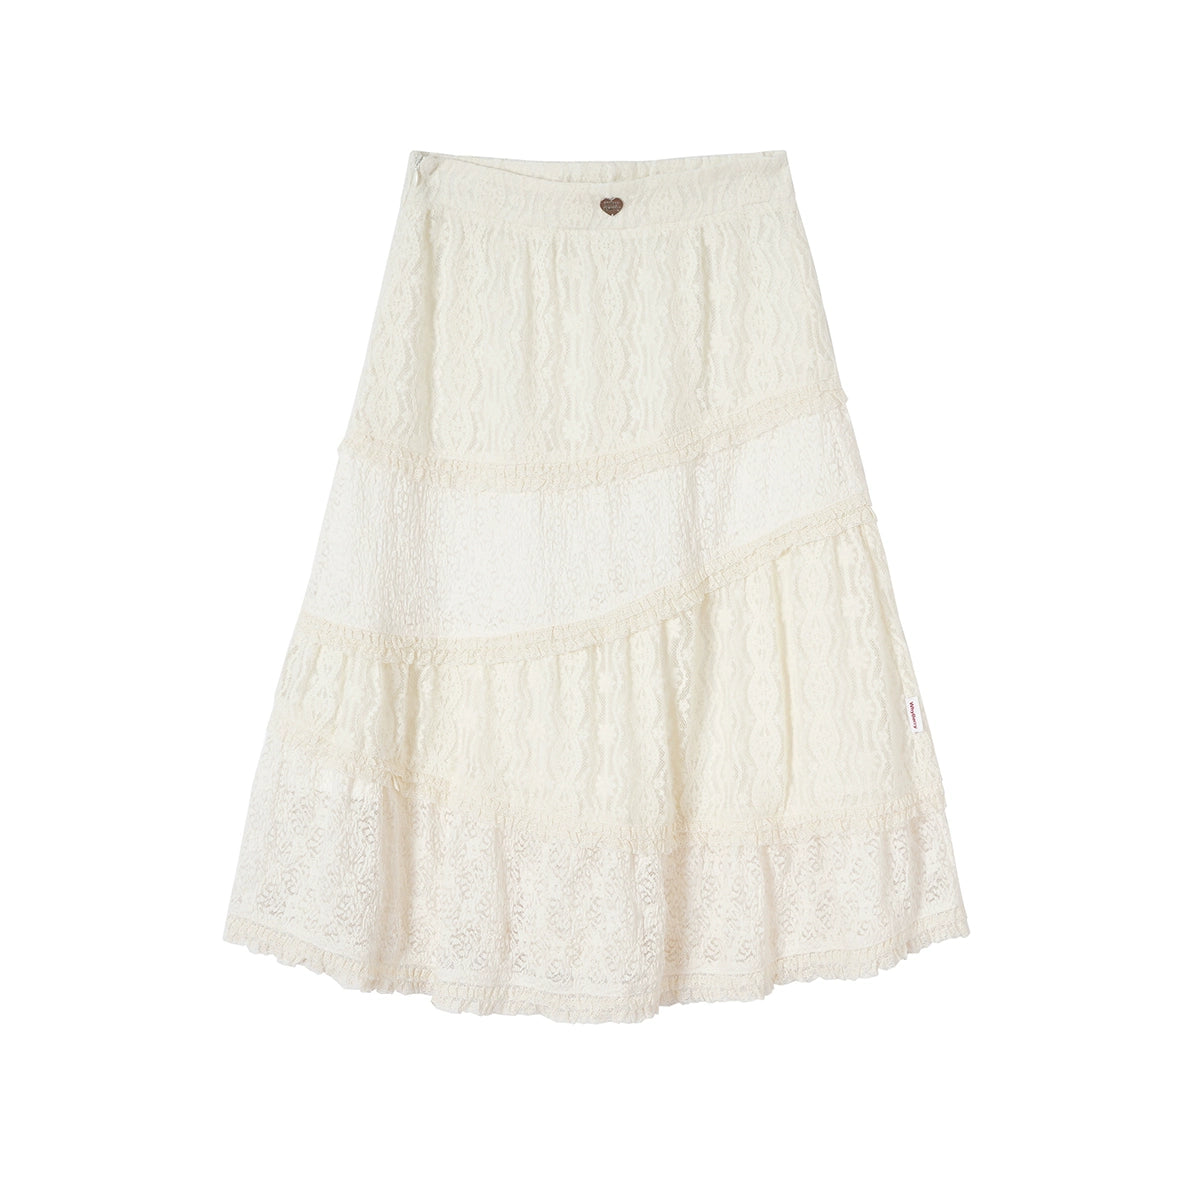 Double Lace Cake White A-line Skirt